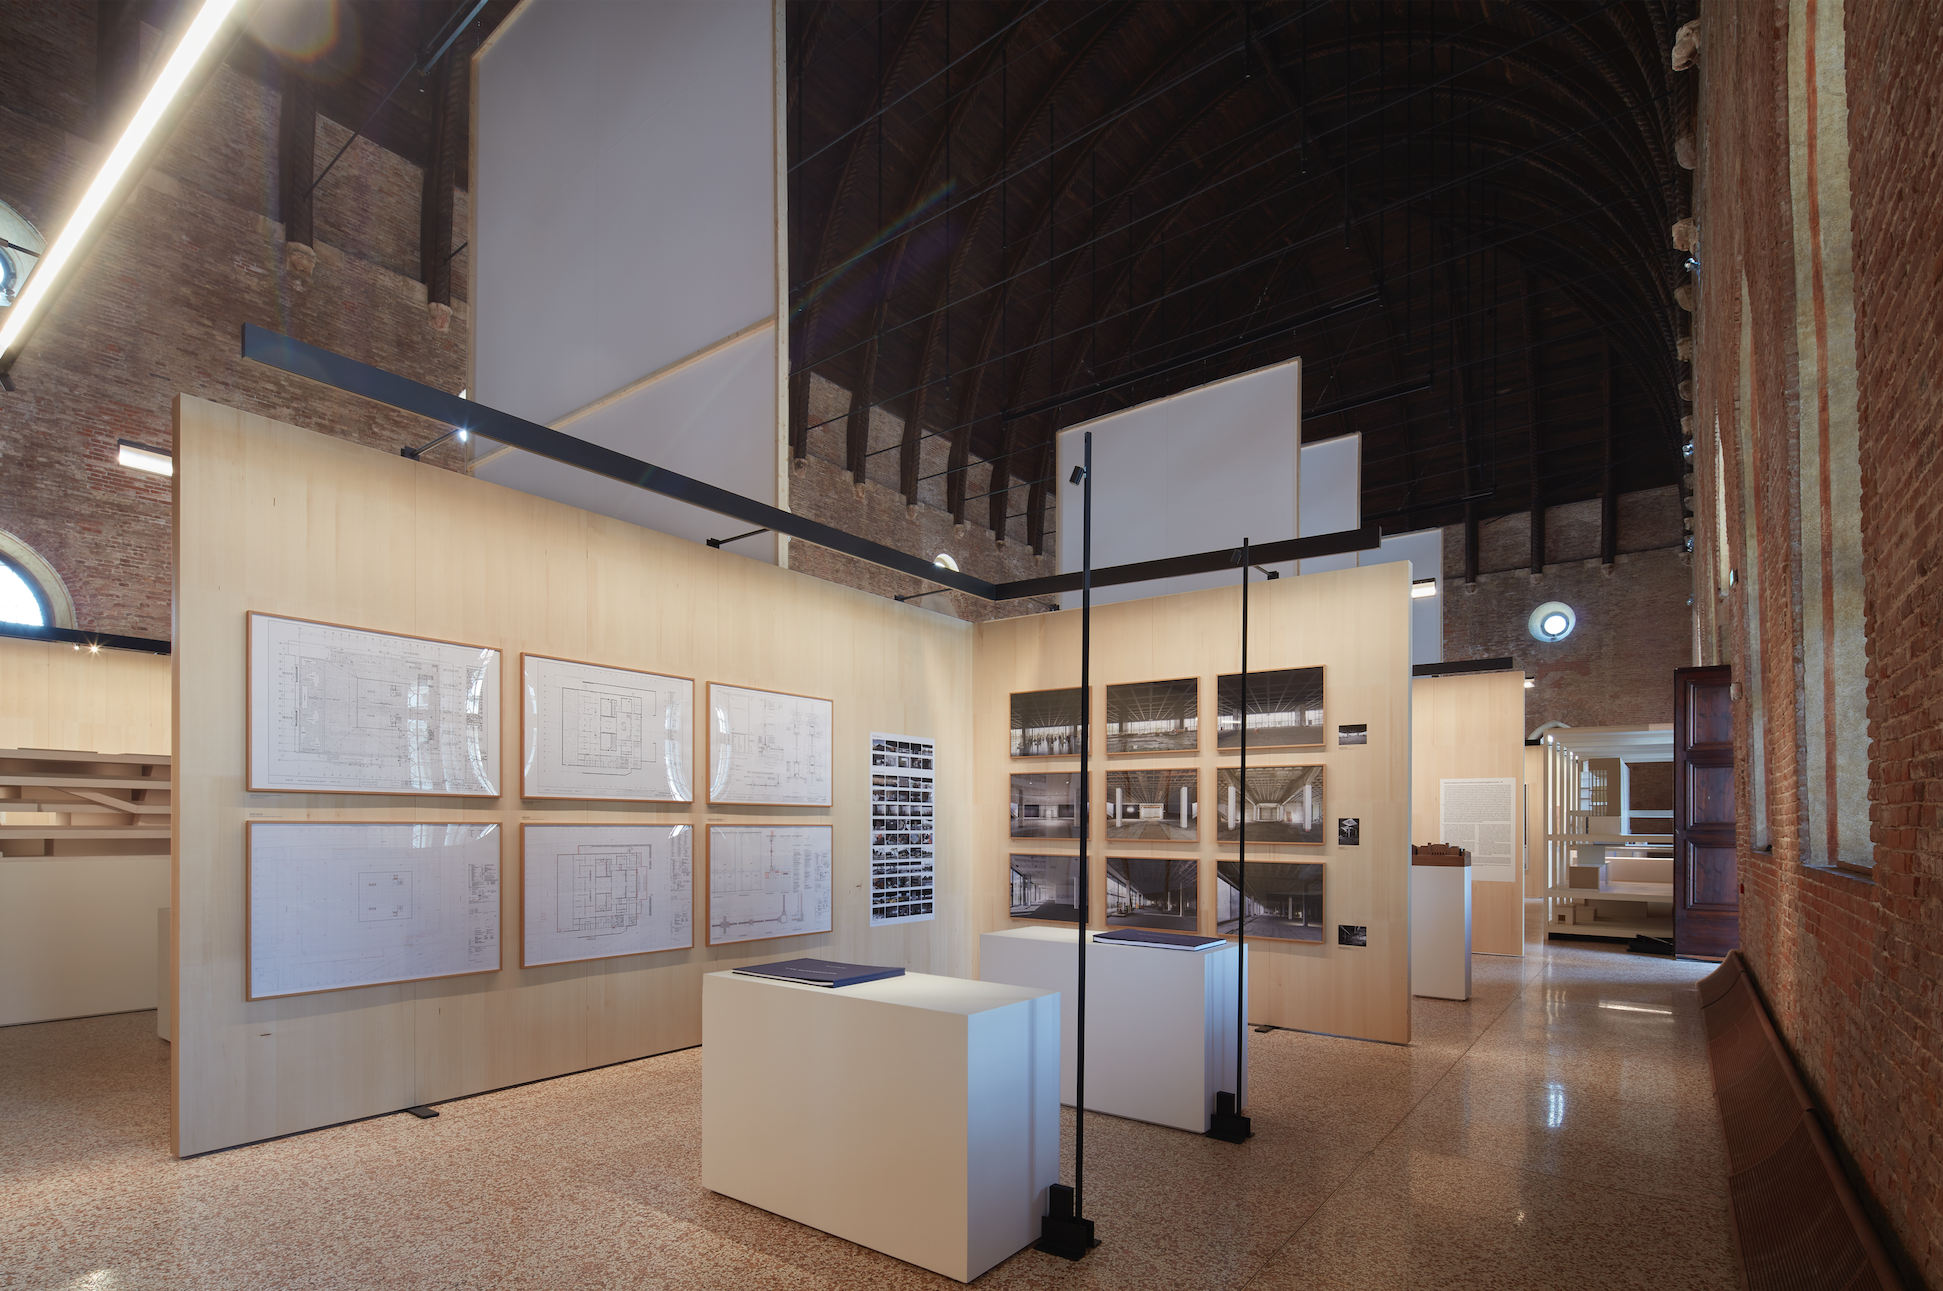 vicenza exhibition displays the work of david chipperfield architects